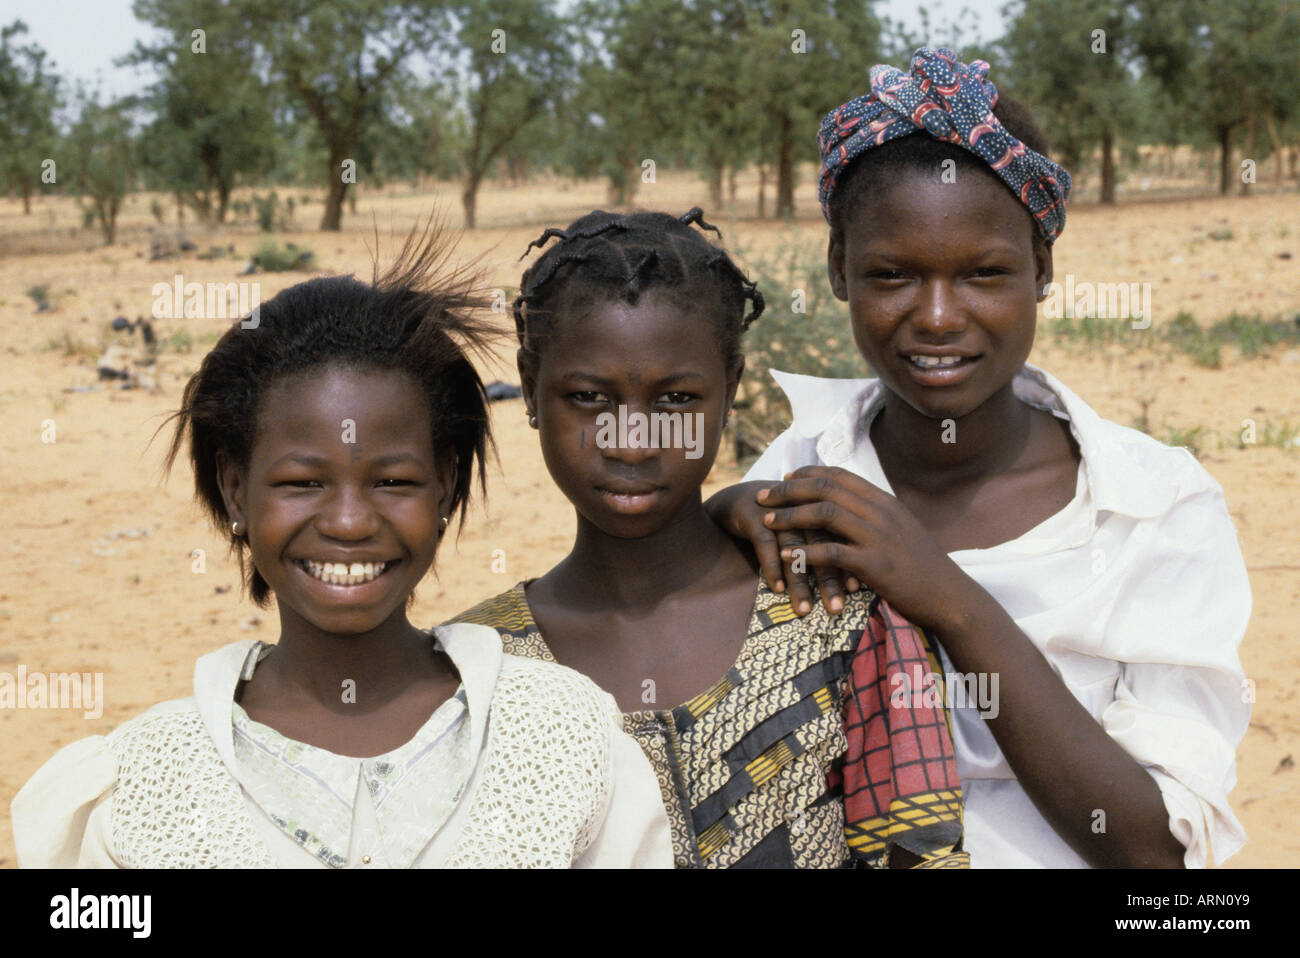 Niamey, Niger, West Africa. Three Nigerien Girls. Young Women, two with Facial Tattoos Denoting Tribal Affiliation. Stock Photo